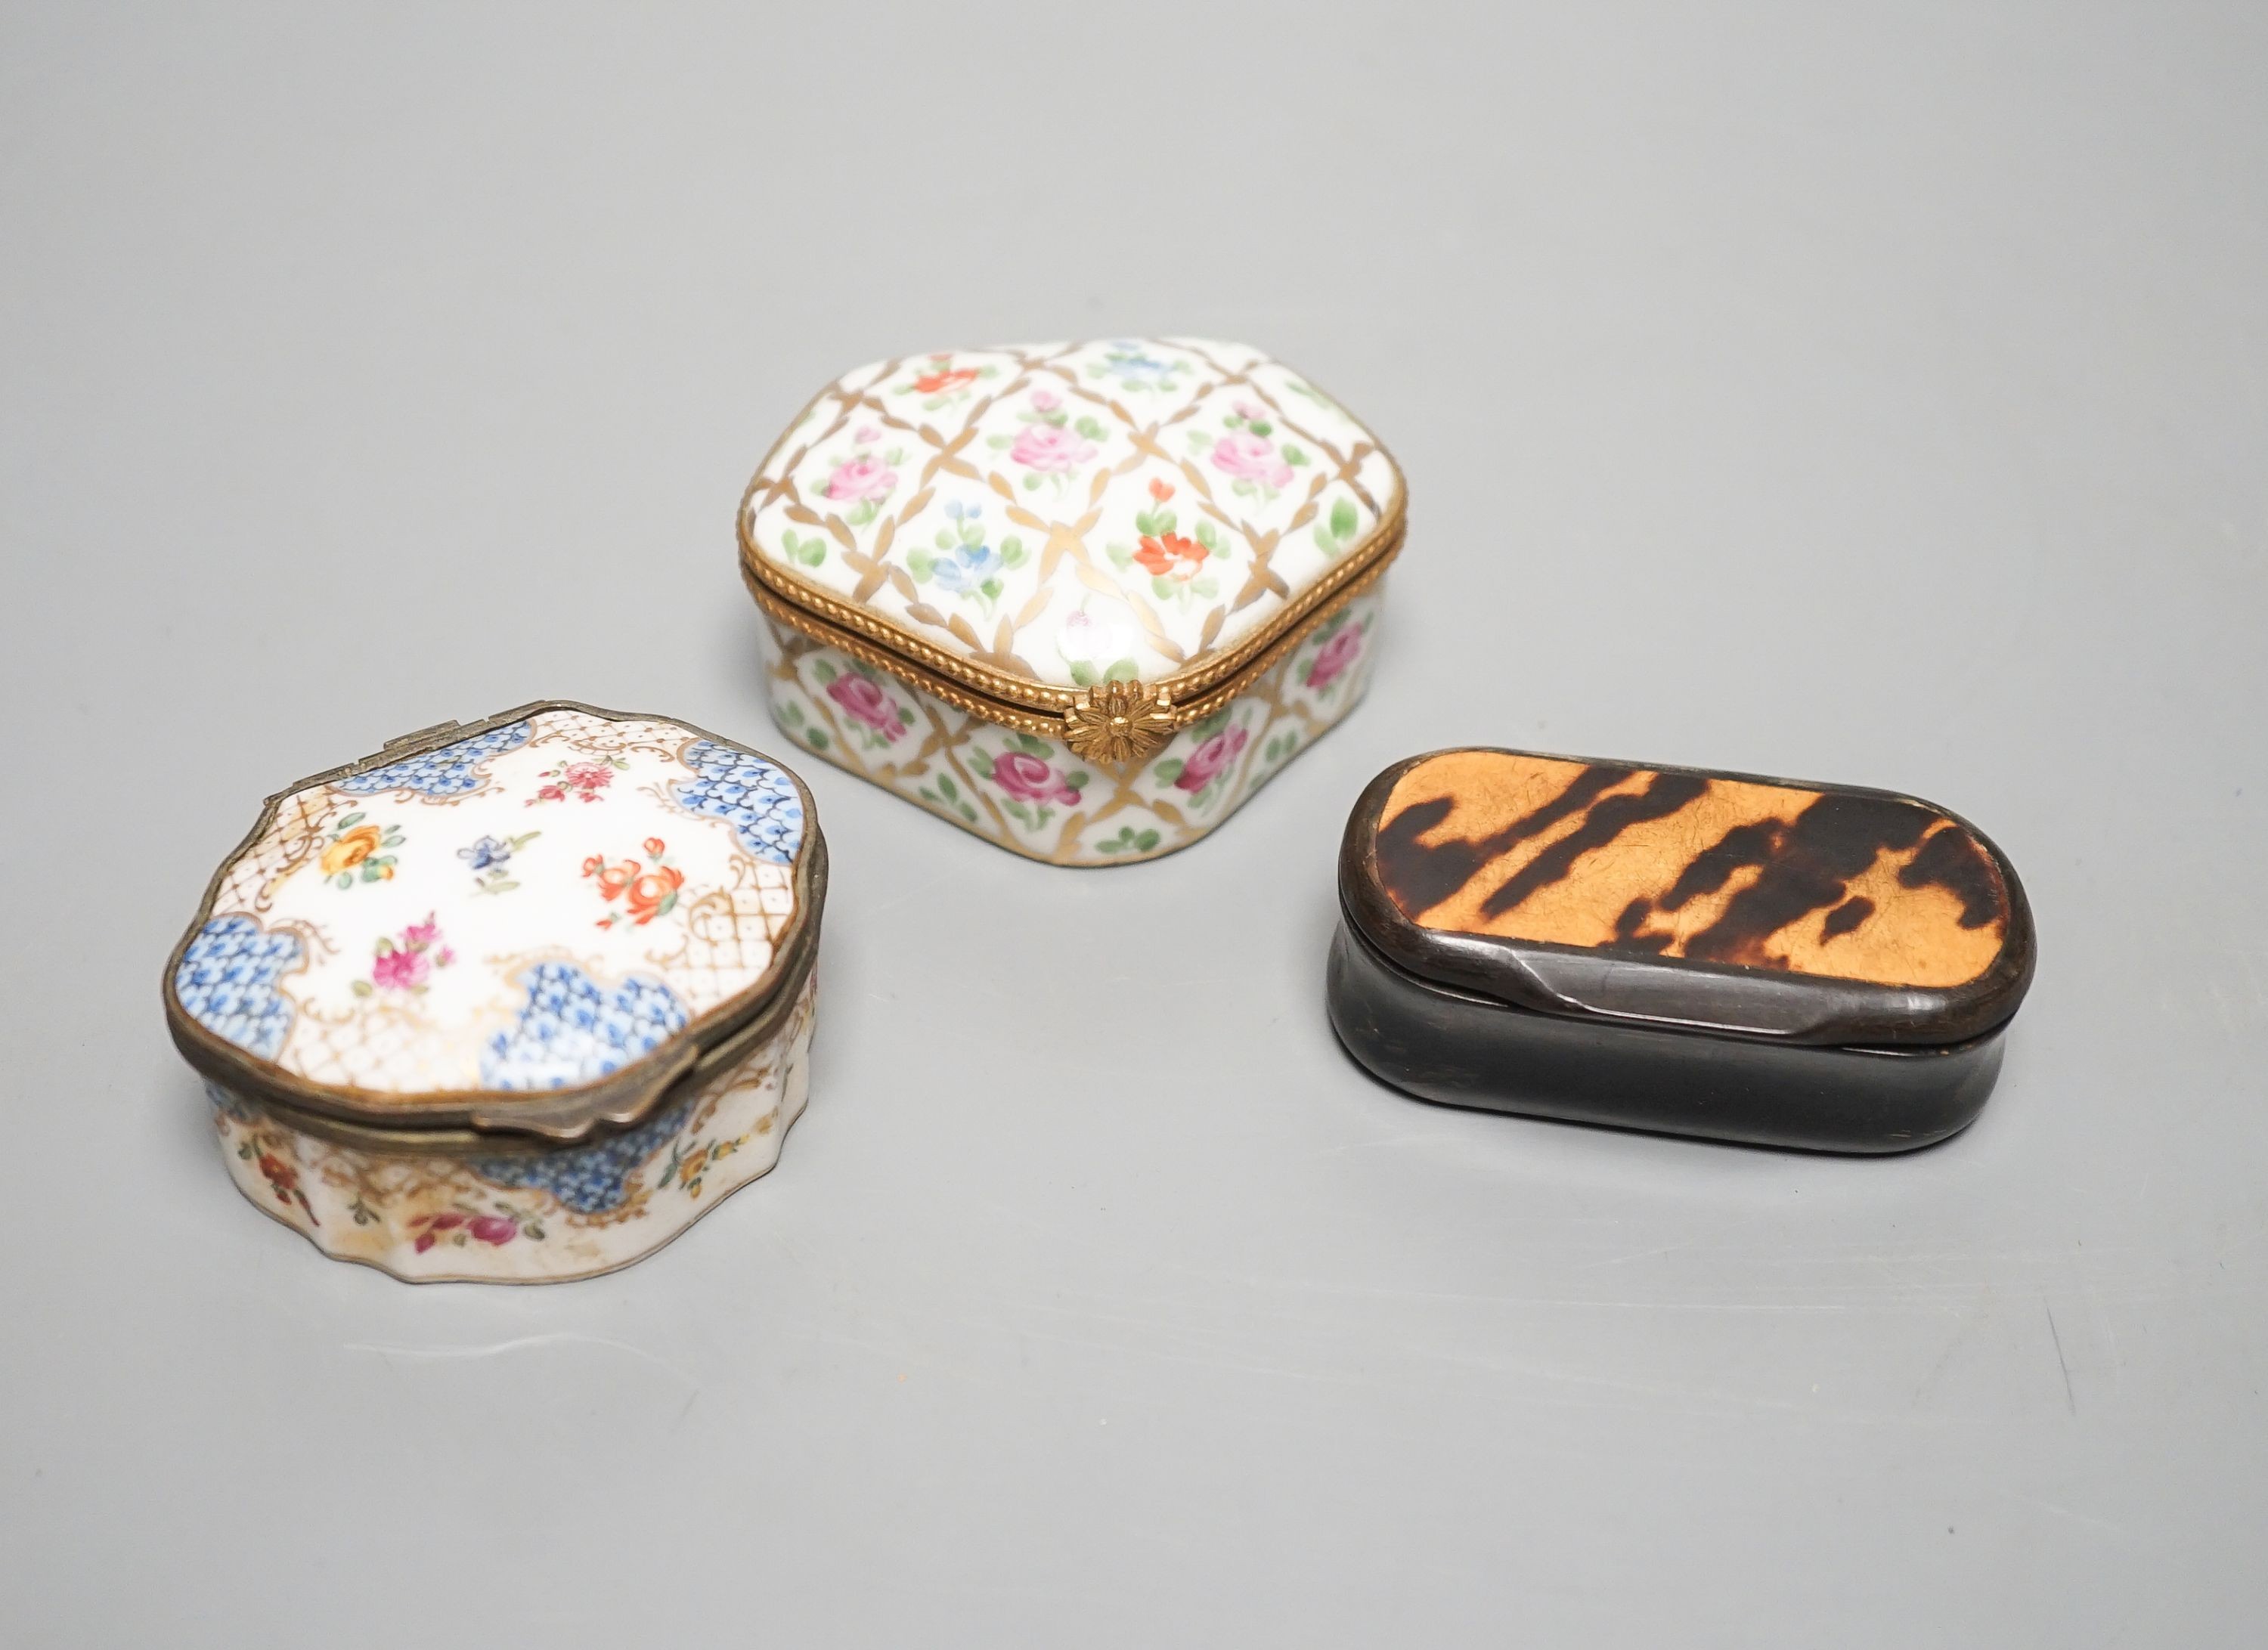 A Limoges porcelain trinket box, 6.5cm another and a horn and tortoiseshell snuff box (3)